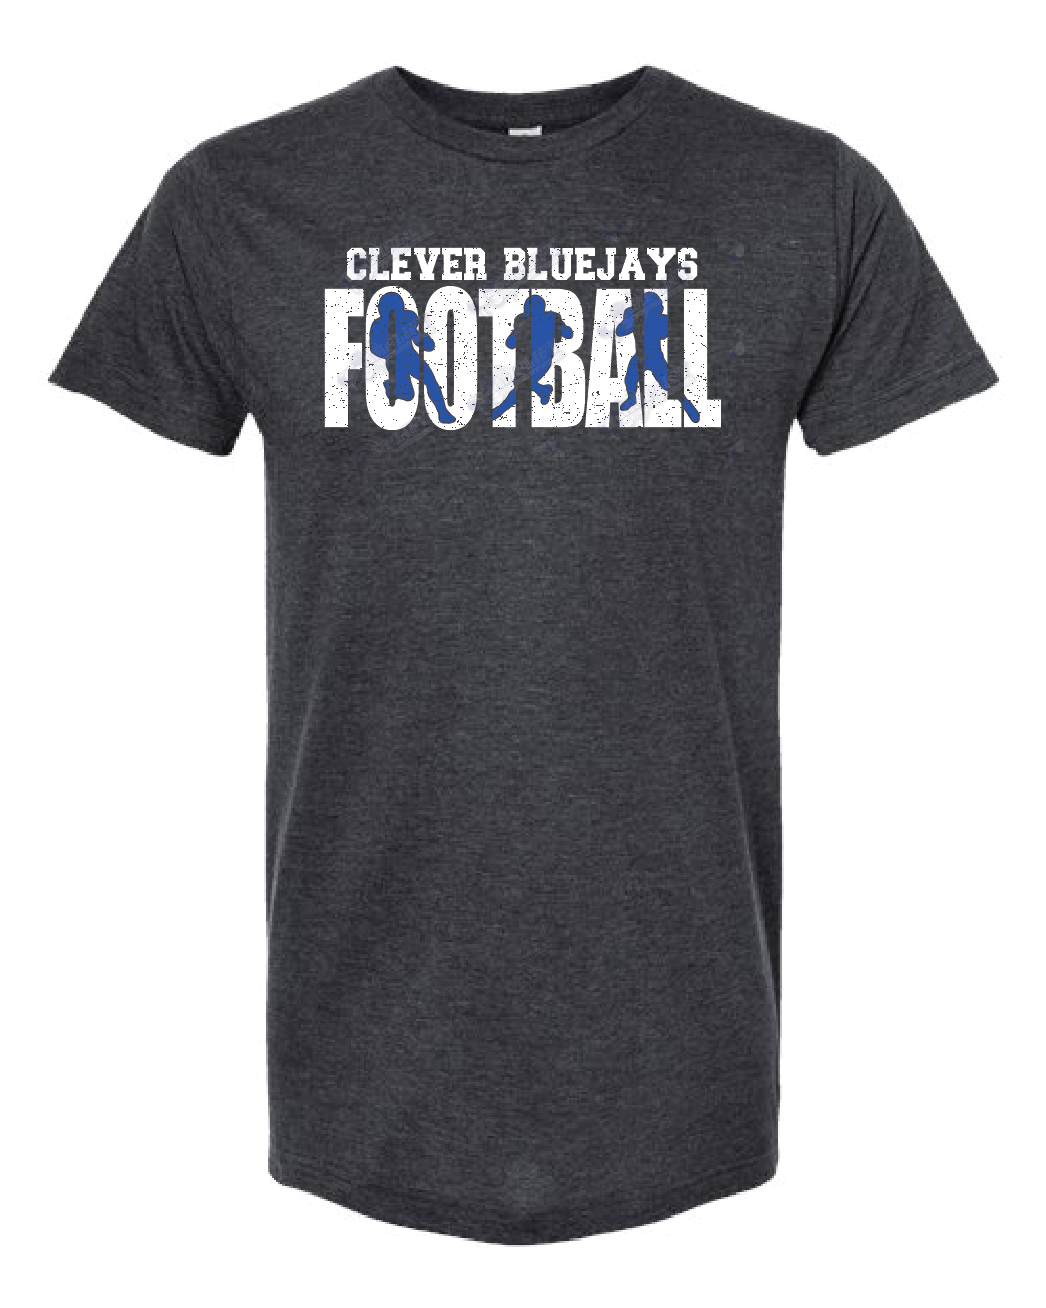 Clever Bluejays Football T-shirt